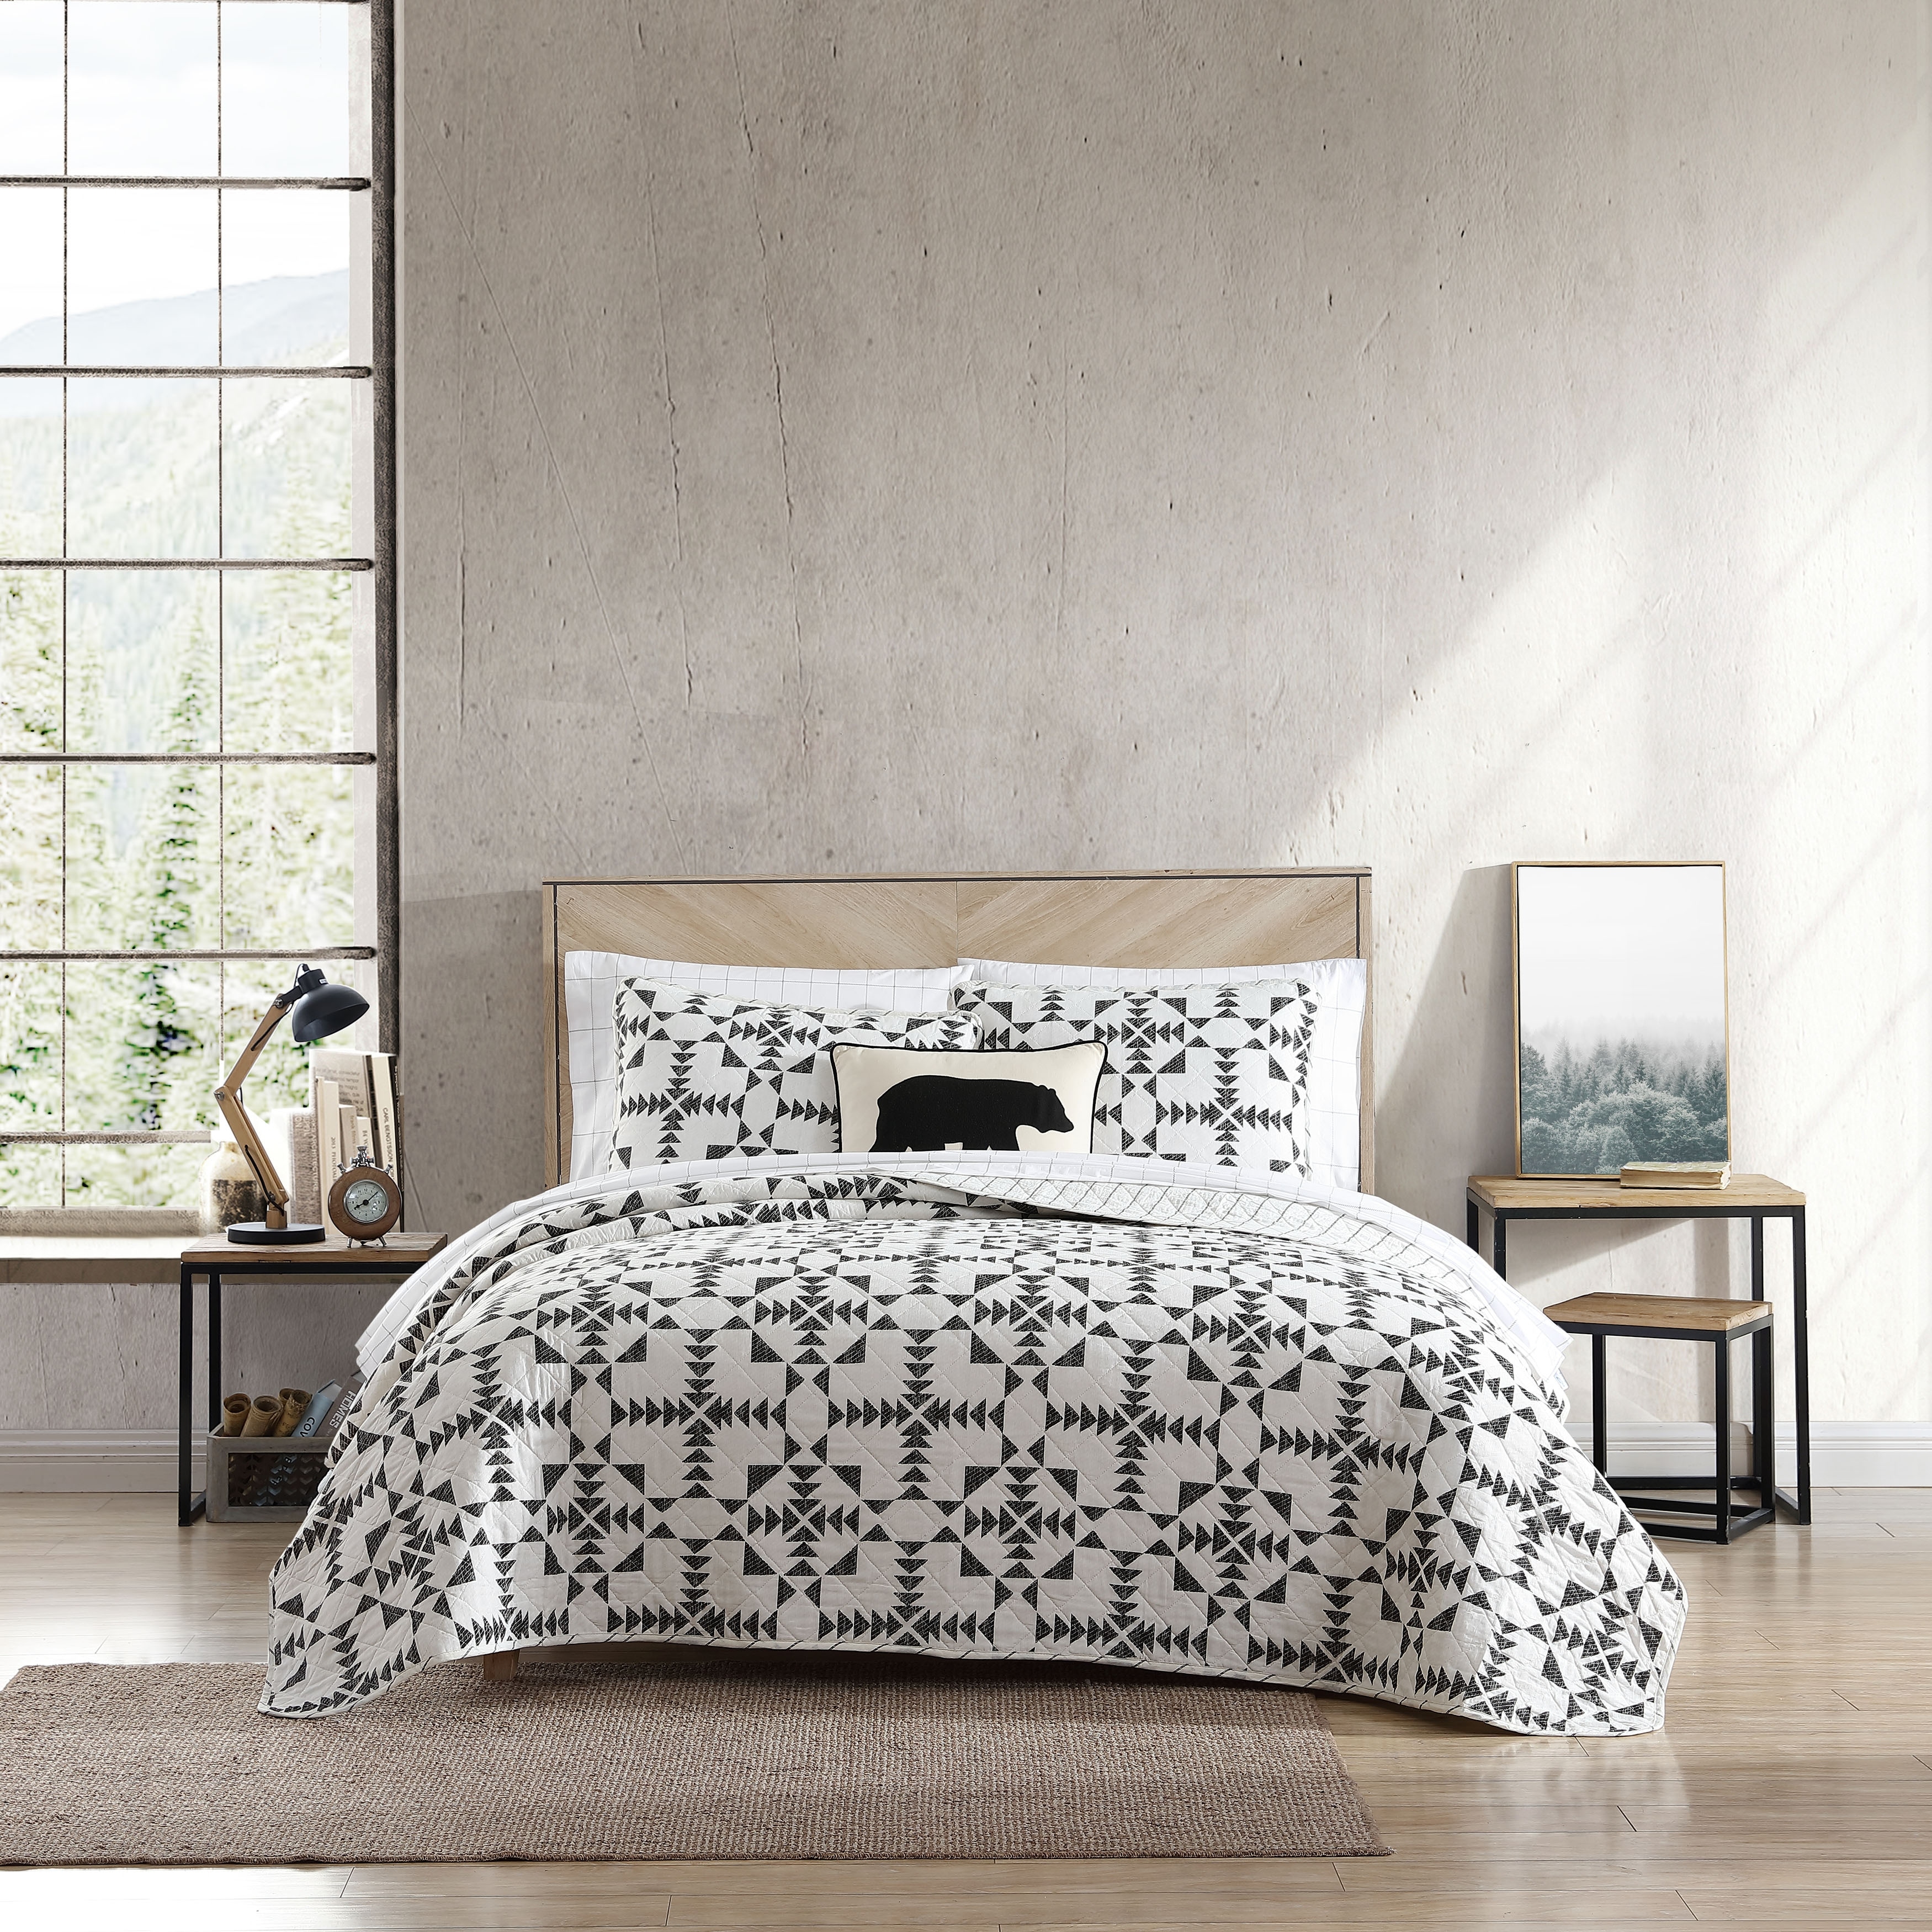 Buy Donna Sharp Full/Queen Bedding Set - 3 Piece - Forest Weave Lodge Quilt  Set with Full/Queen Quilt and Two Standard Pillow Shams - Fits Queen Size  and Full Size Beds 